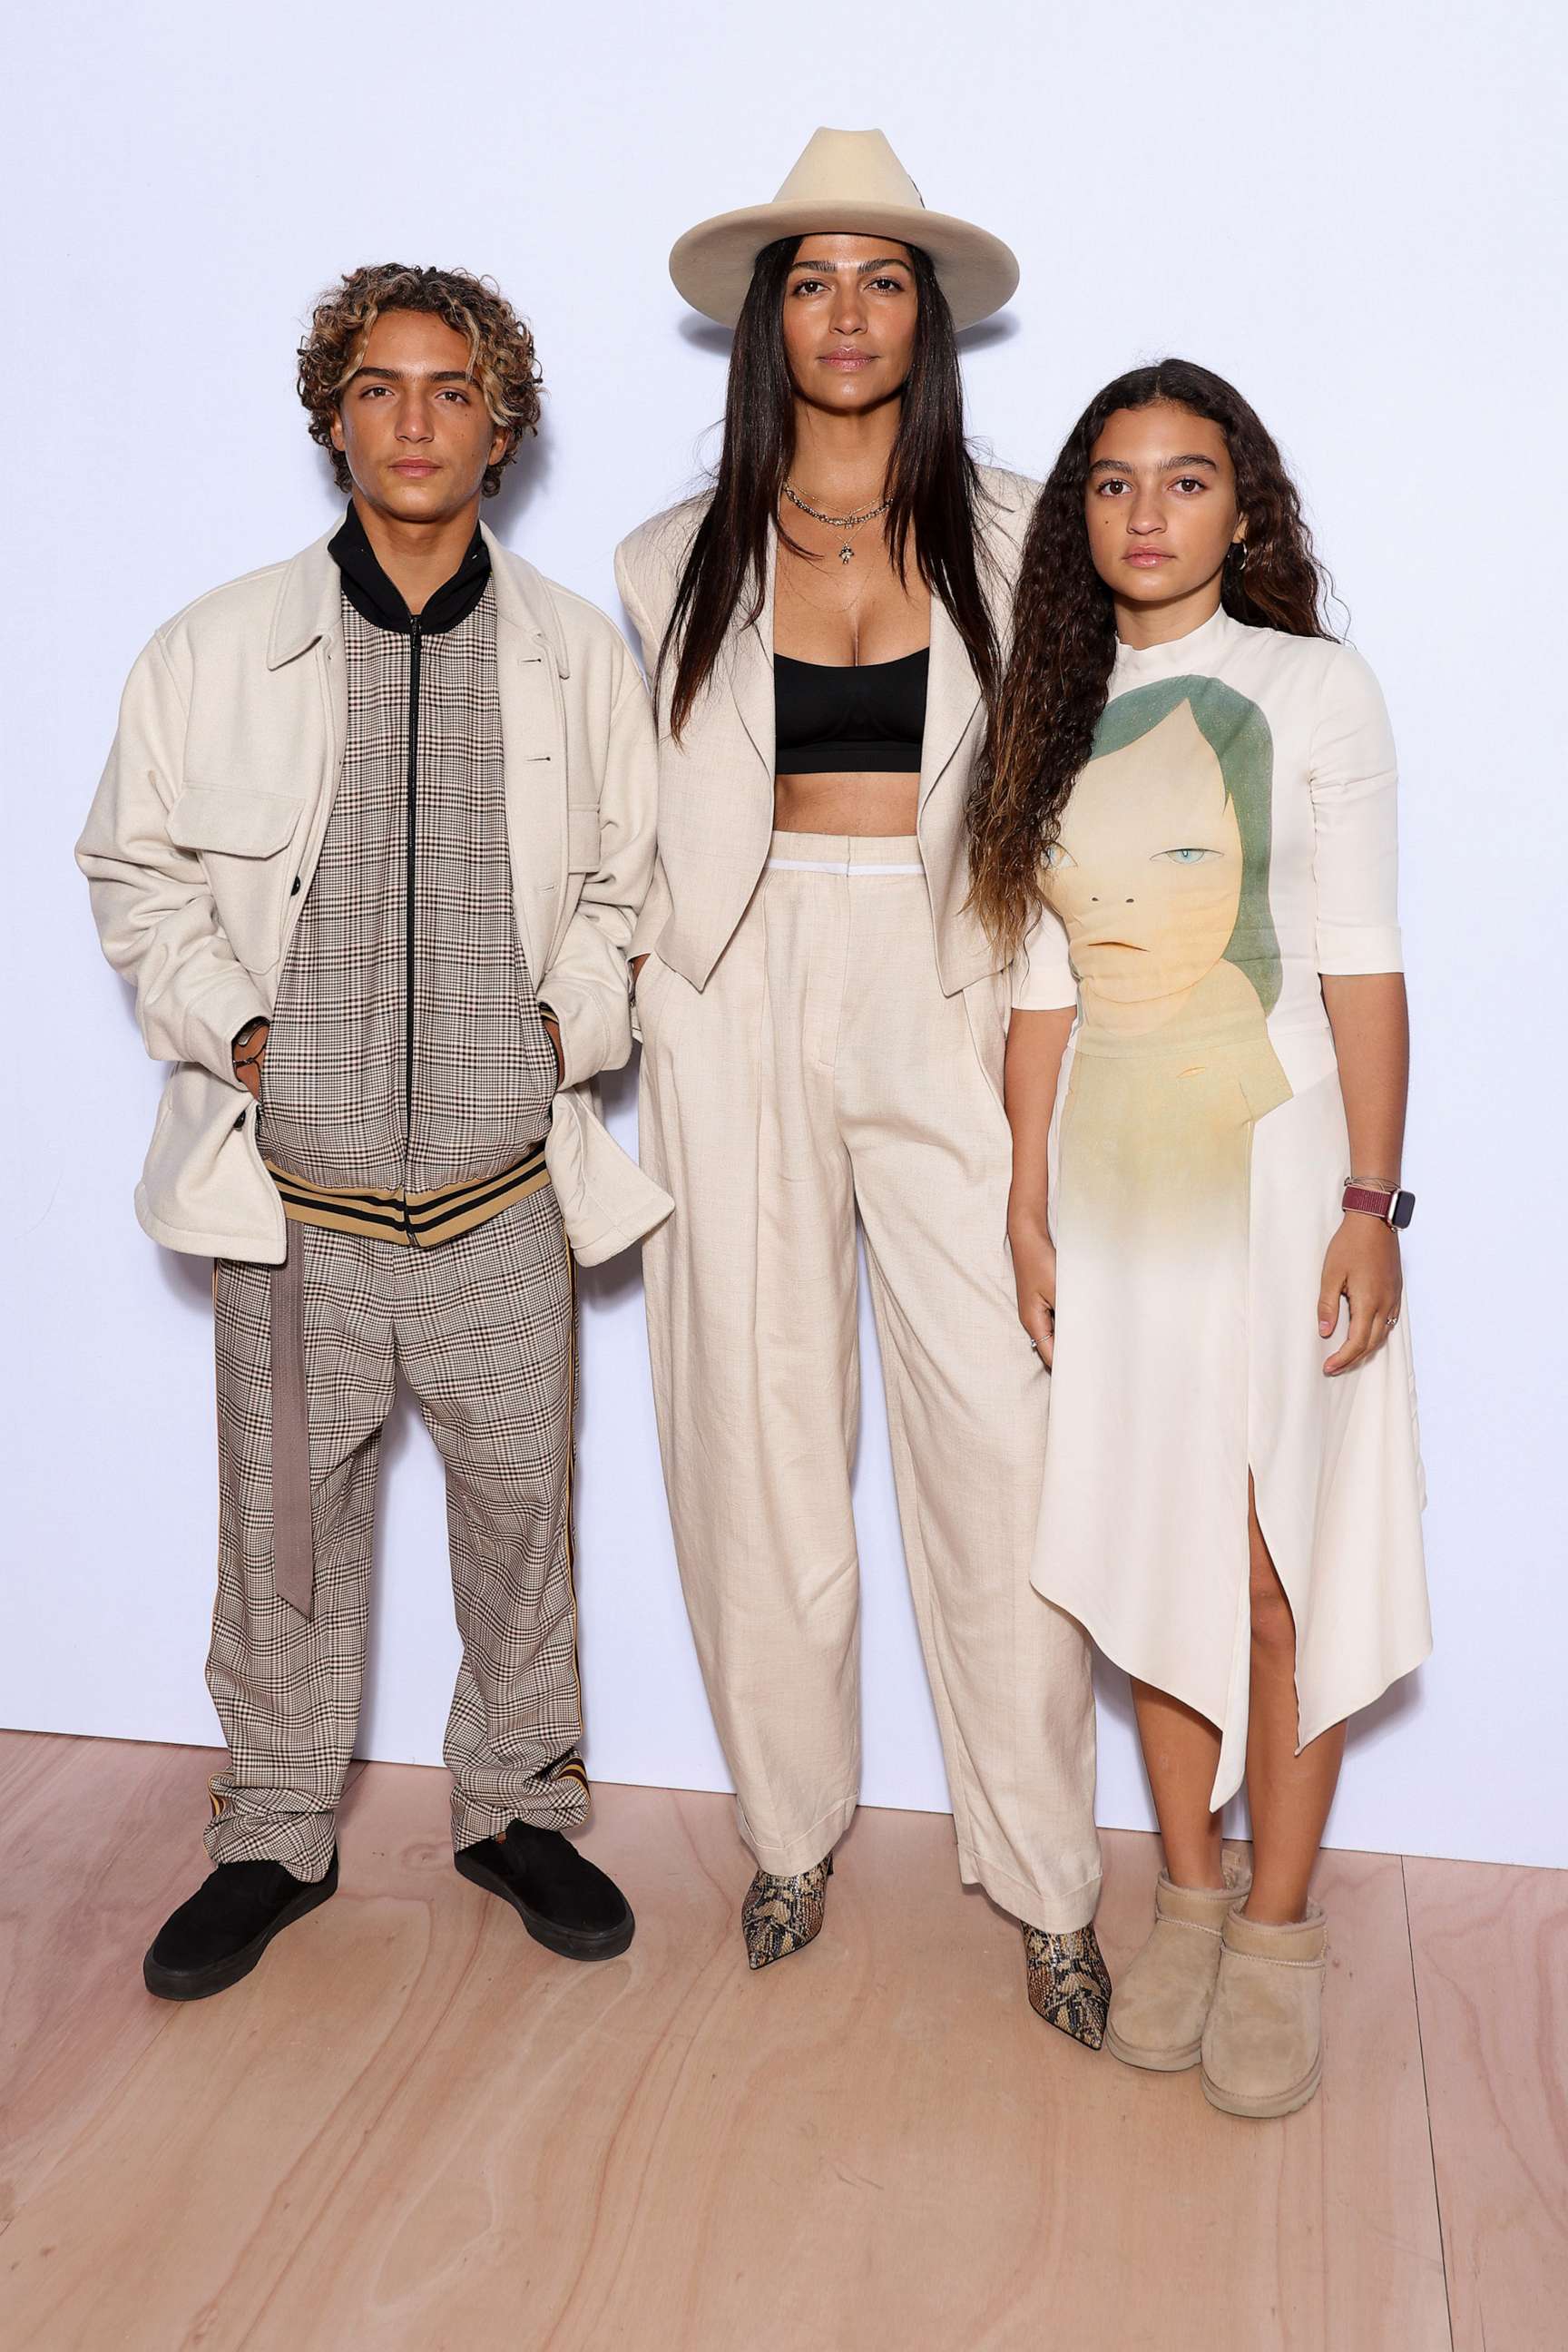 PHOTO: Camila Alves McConaughey with son Levi Alves McConaughey and daughter Vida Alves McConaughey attend the Stella McCartney Womenswear Fall Winter 2023-2024 show as part of Paris Fashion Week, March 06, 2023 in Paris.